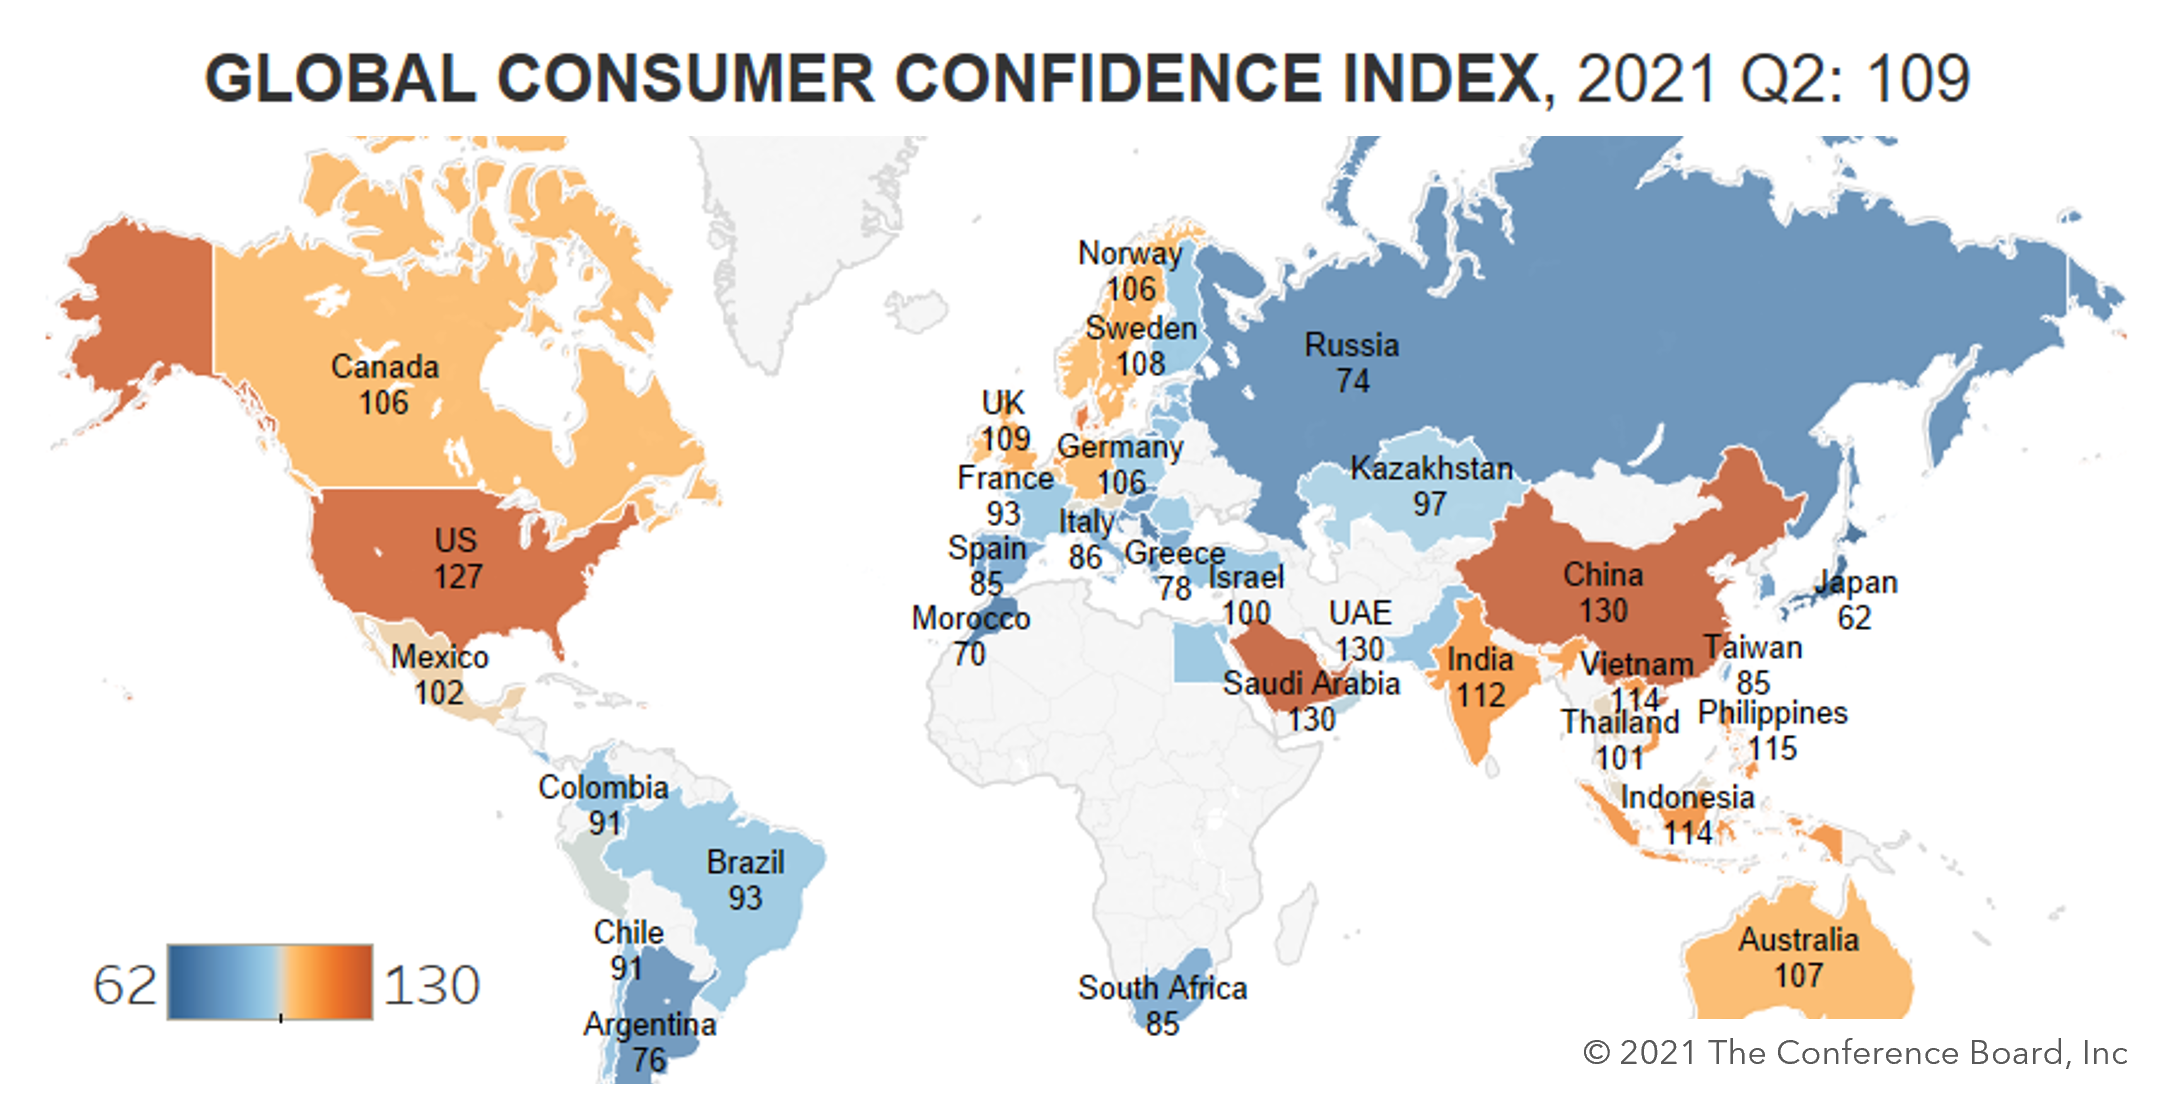 Global consumer confidence hits record high, but regional disparities remain